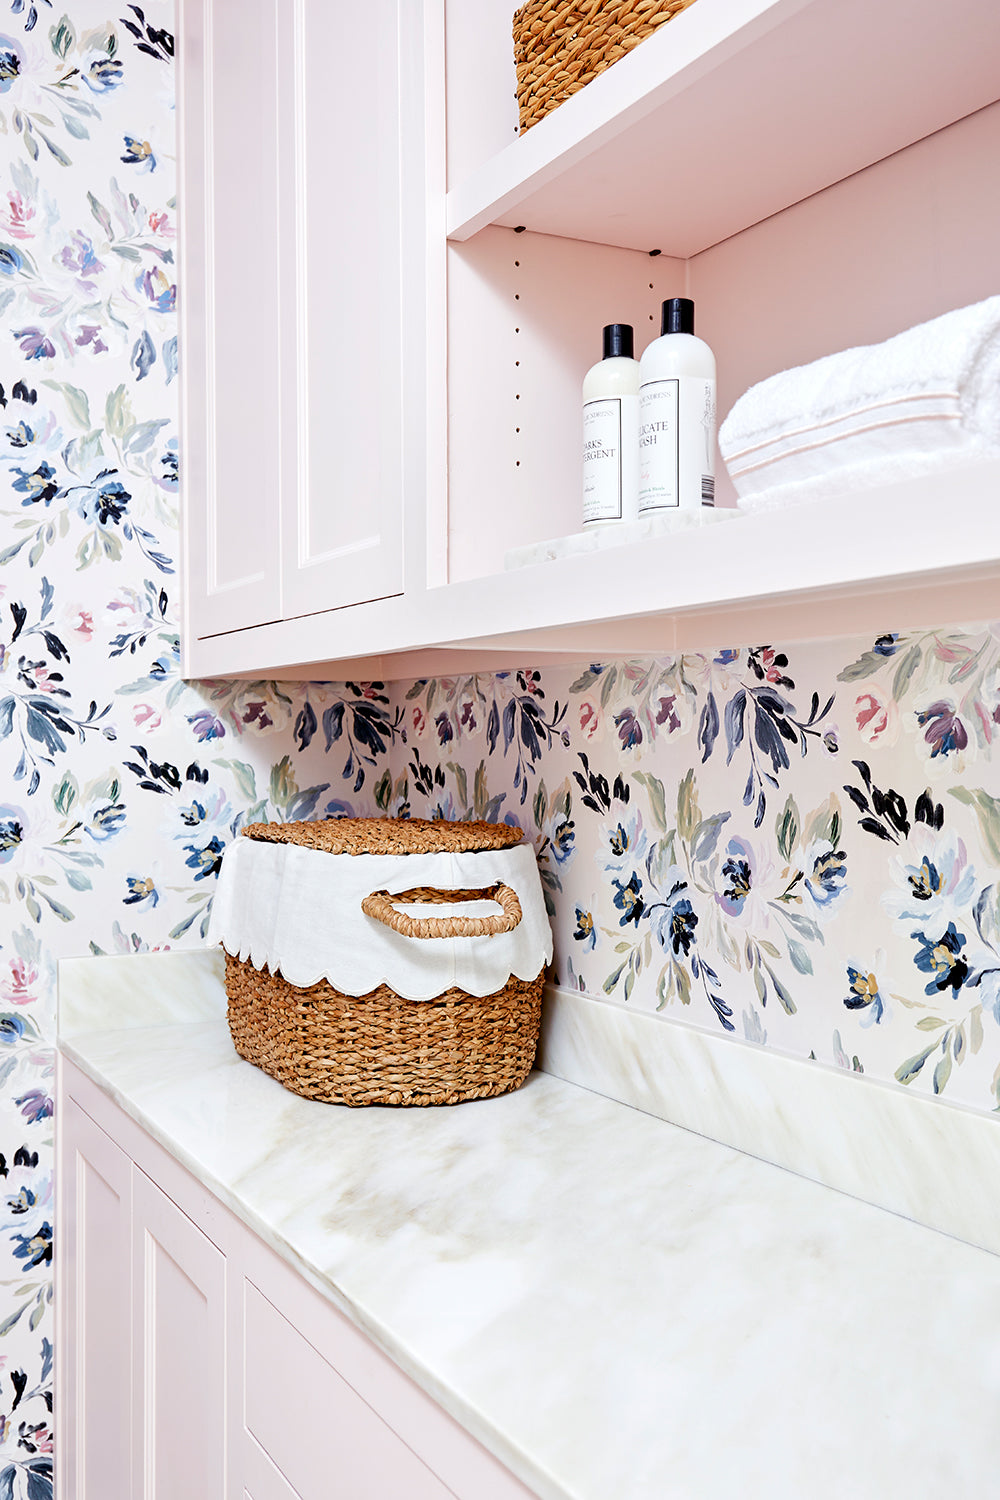 How To: The Best Rooms for Wallpaper